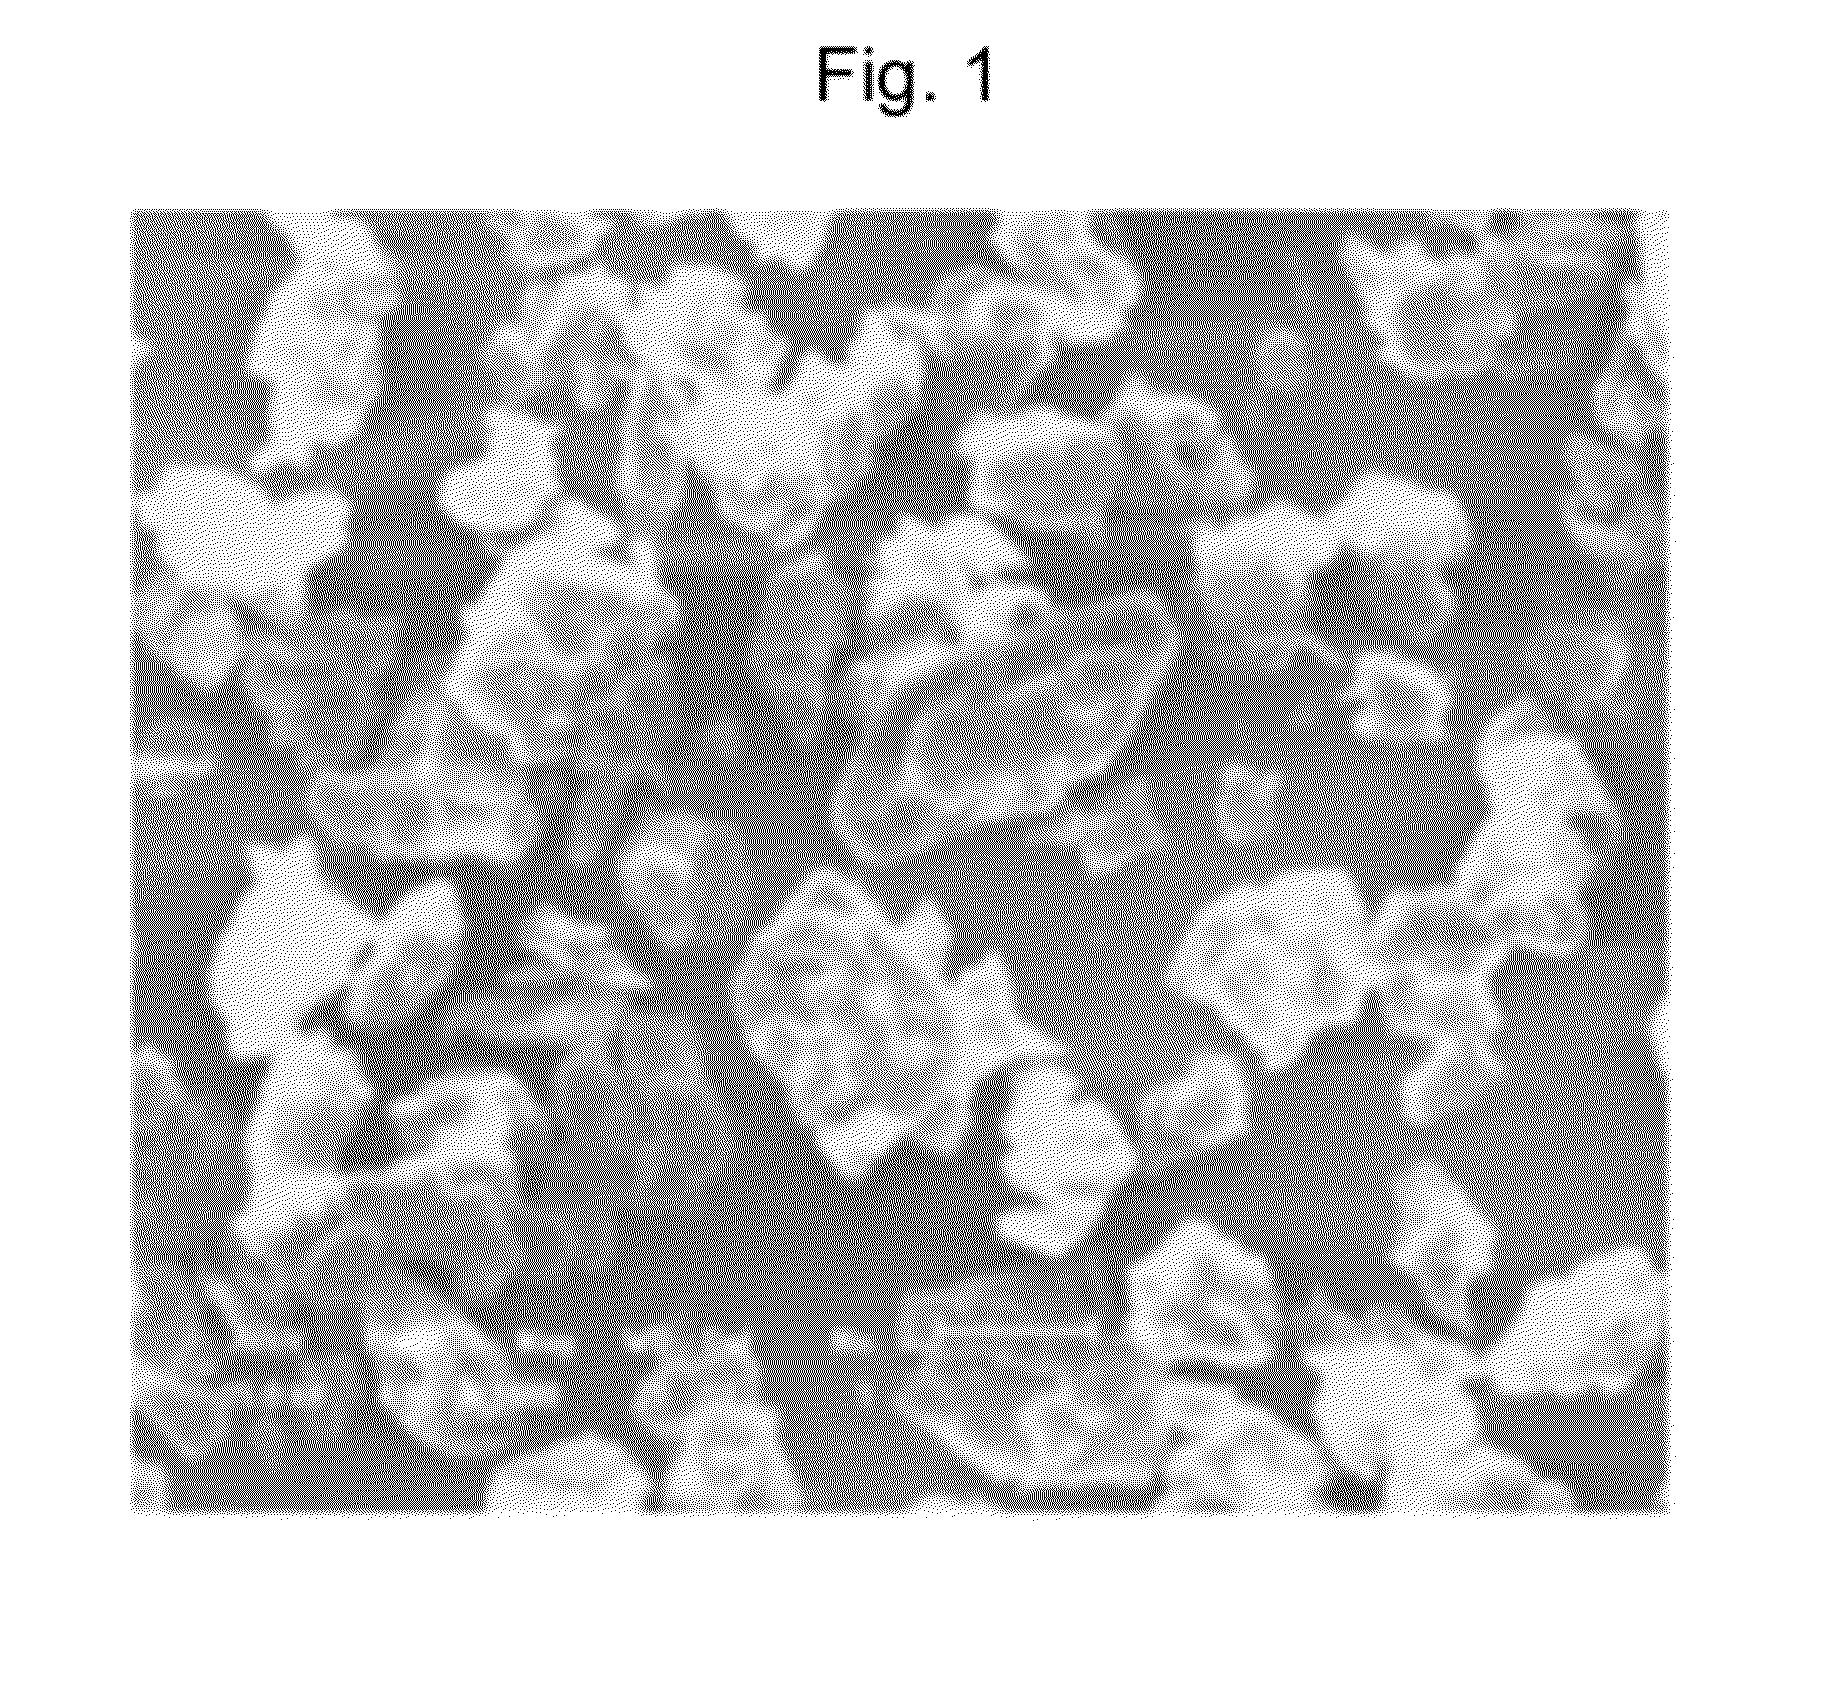 Novel  method  for preparing  composite  particle  comprising  surface  treatment  layer  of  sunscreening  agent  formed  thereon